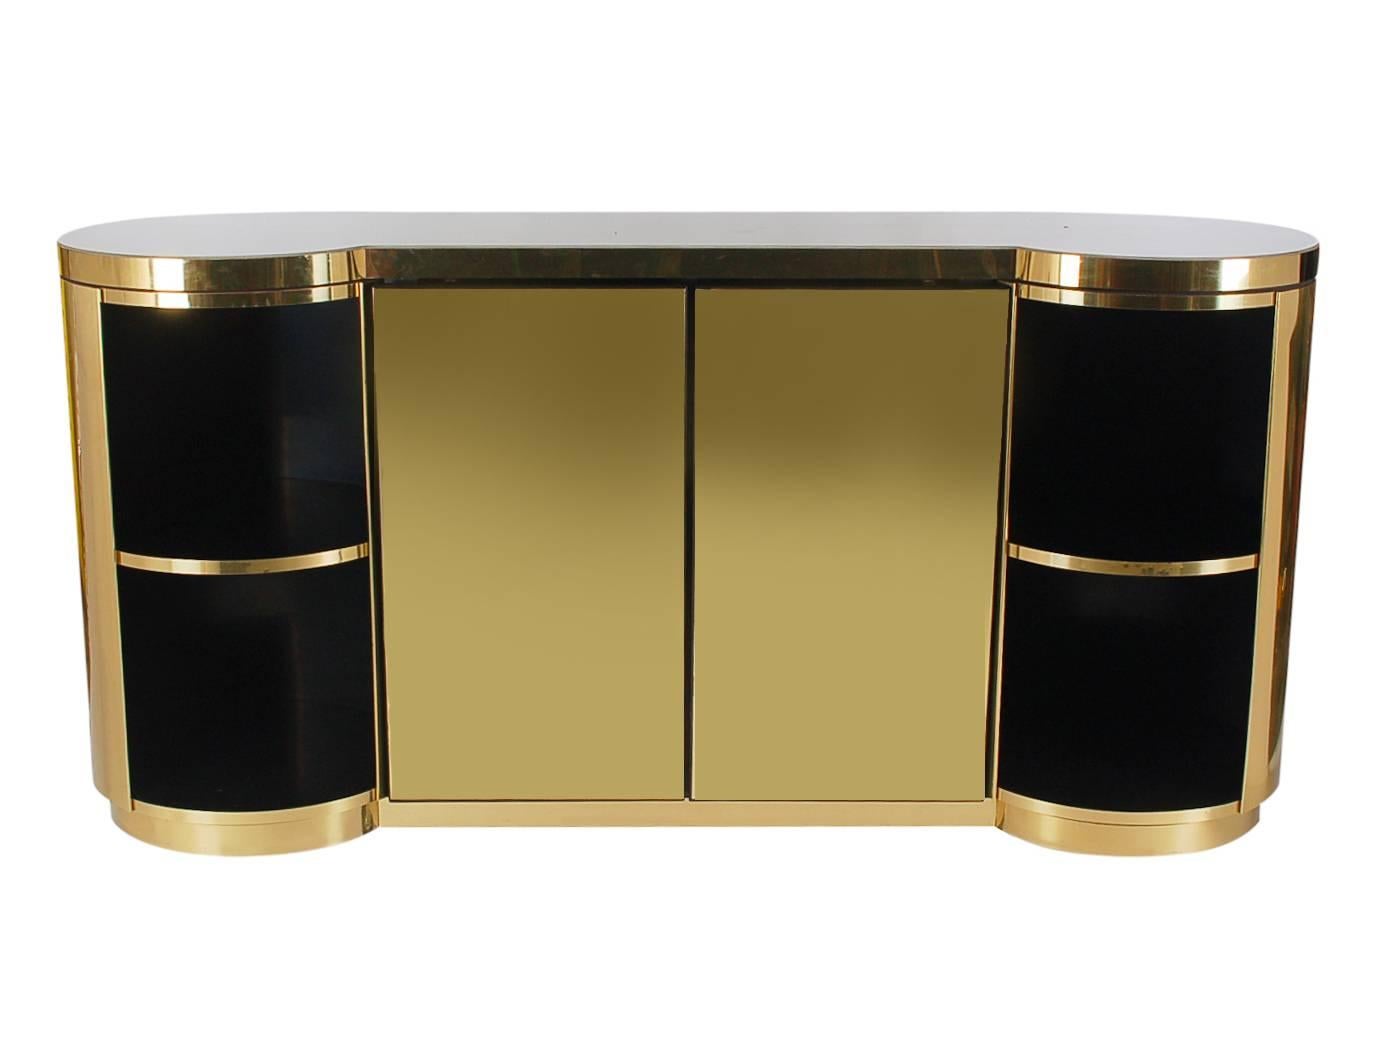 A stunning masterpiece that will add elegance to any space. This cabinet or sideboard is extremely heavy and well made. It features a real brass exterior, a pearl colored epoxy top, and black laminate interiors with plenty of storage space. 

In